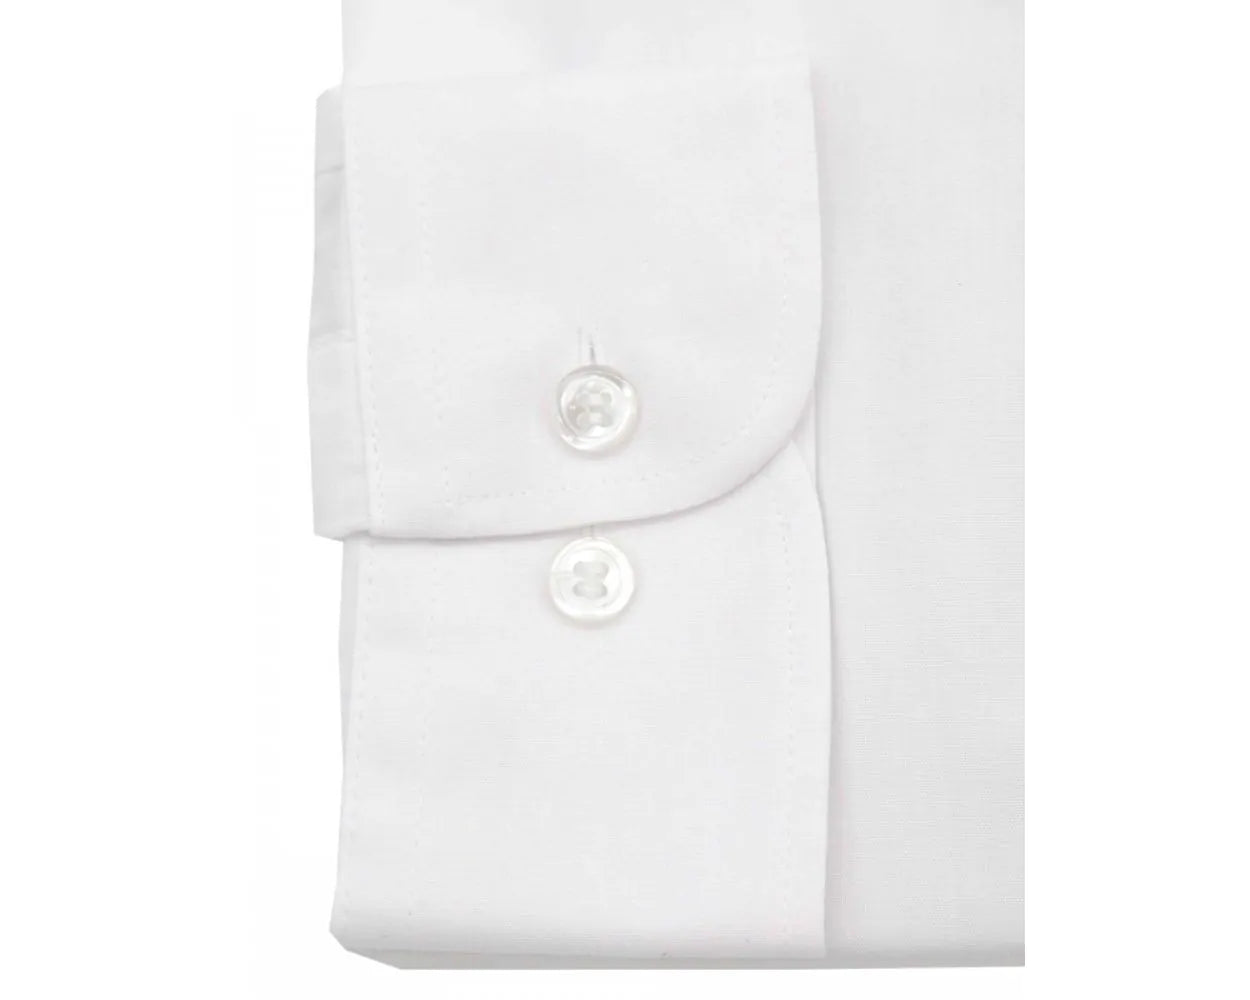 DOUBLE TWO WHITE CLASSIC EASY CARE LONG SLEEVE SHIRT